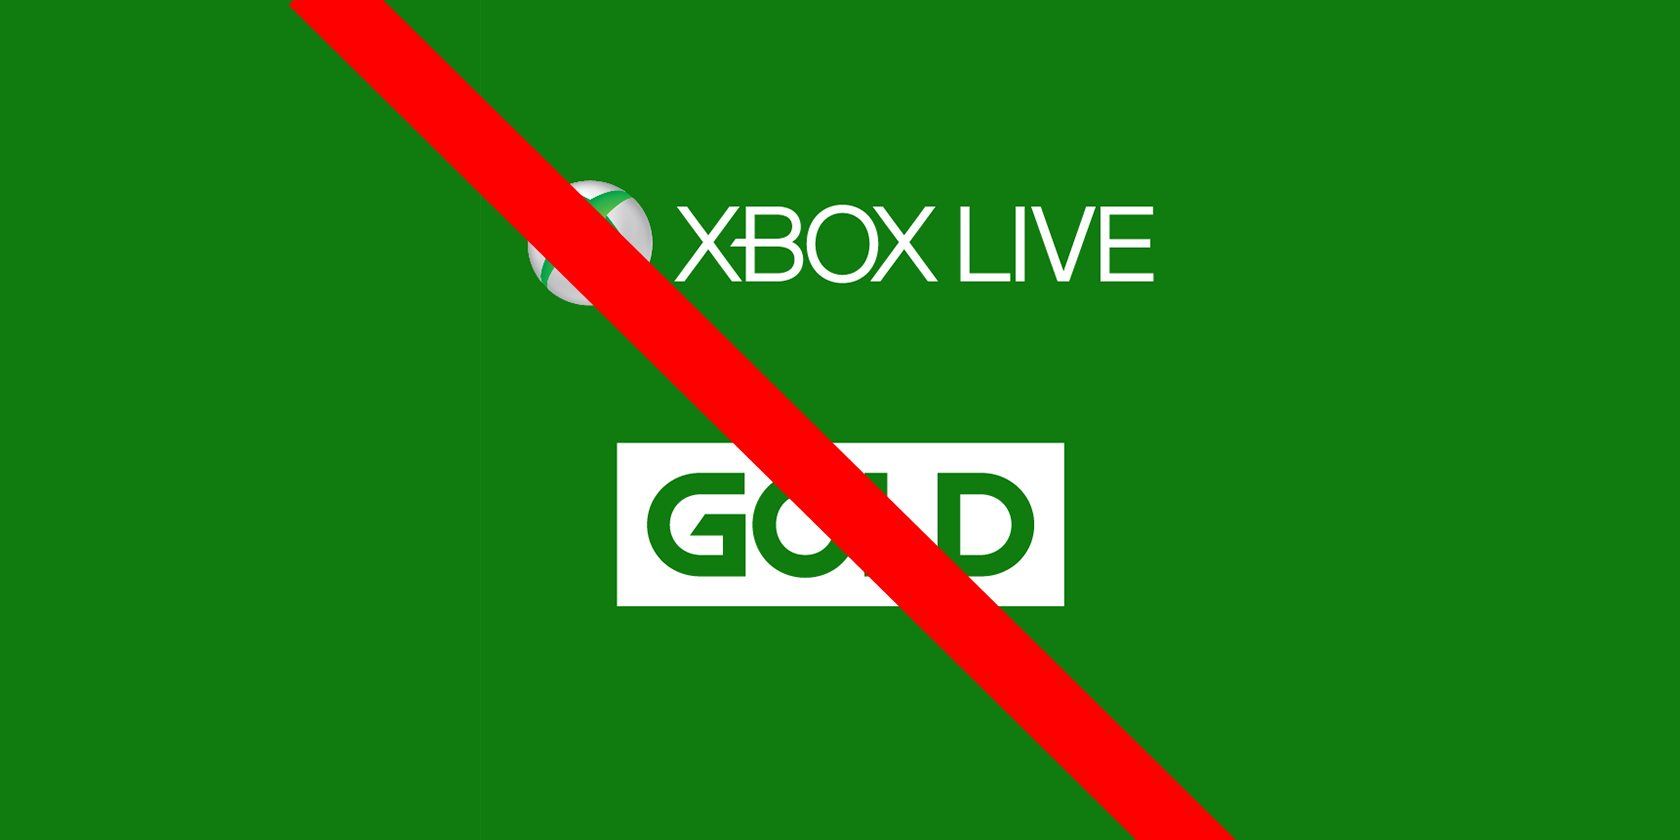 xbox cancel game pass subscription